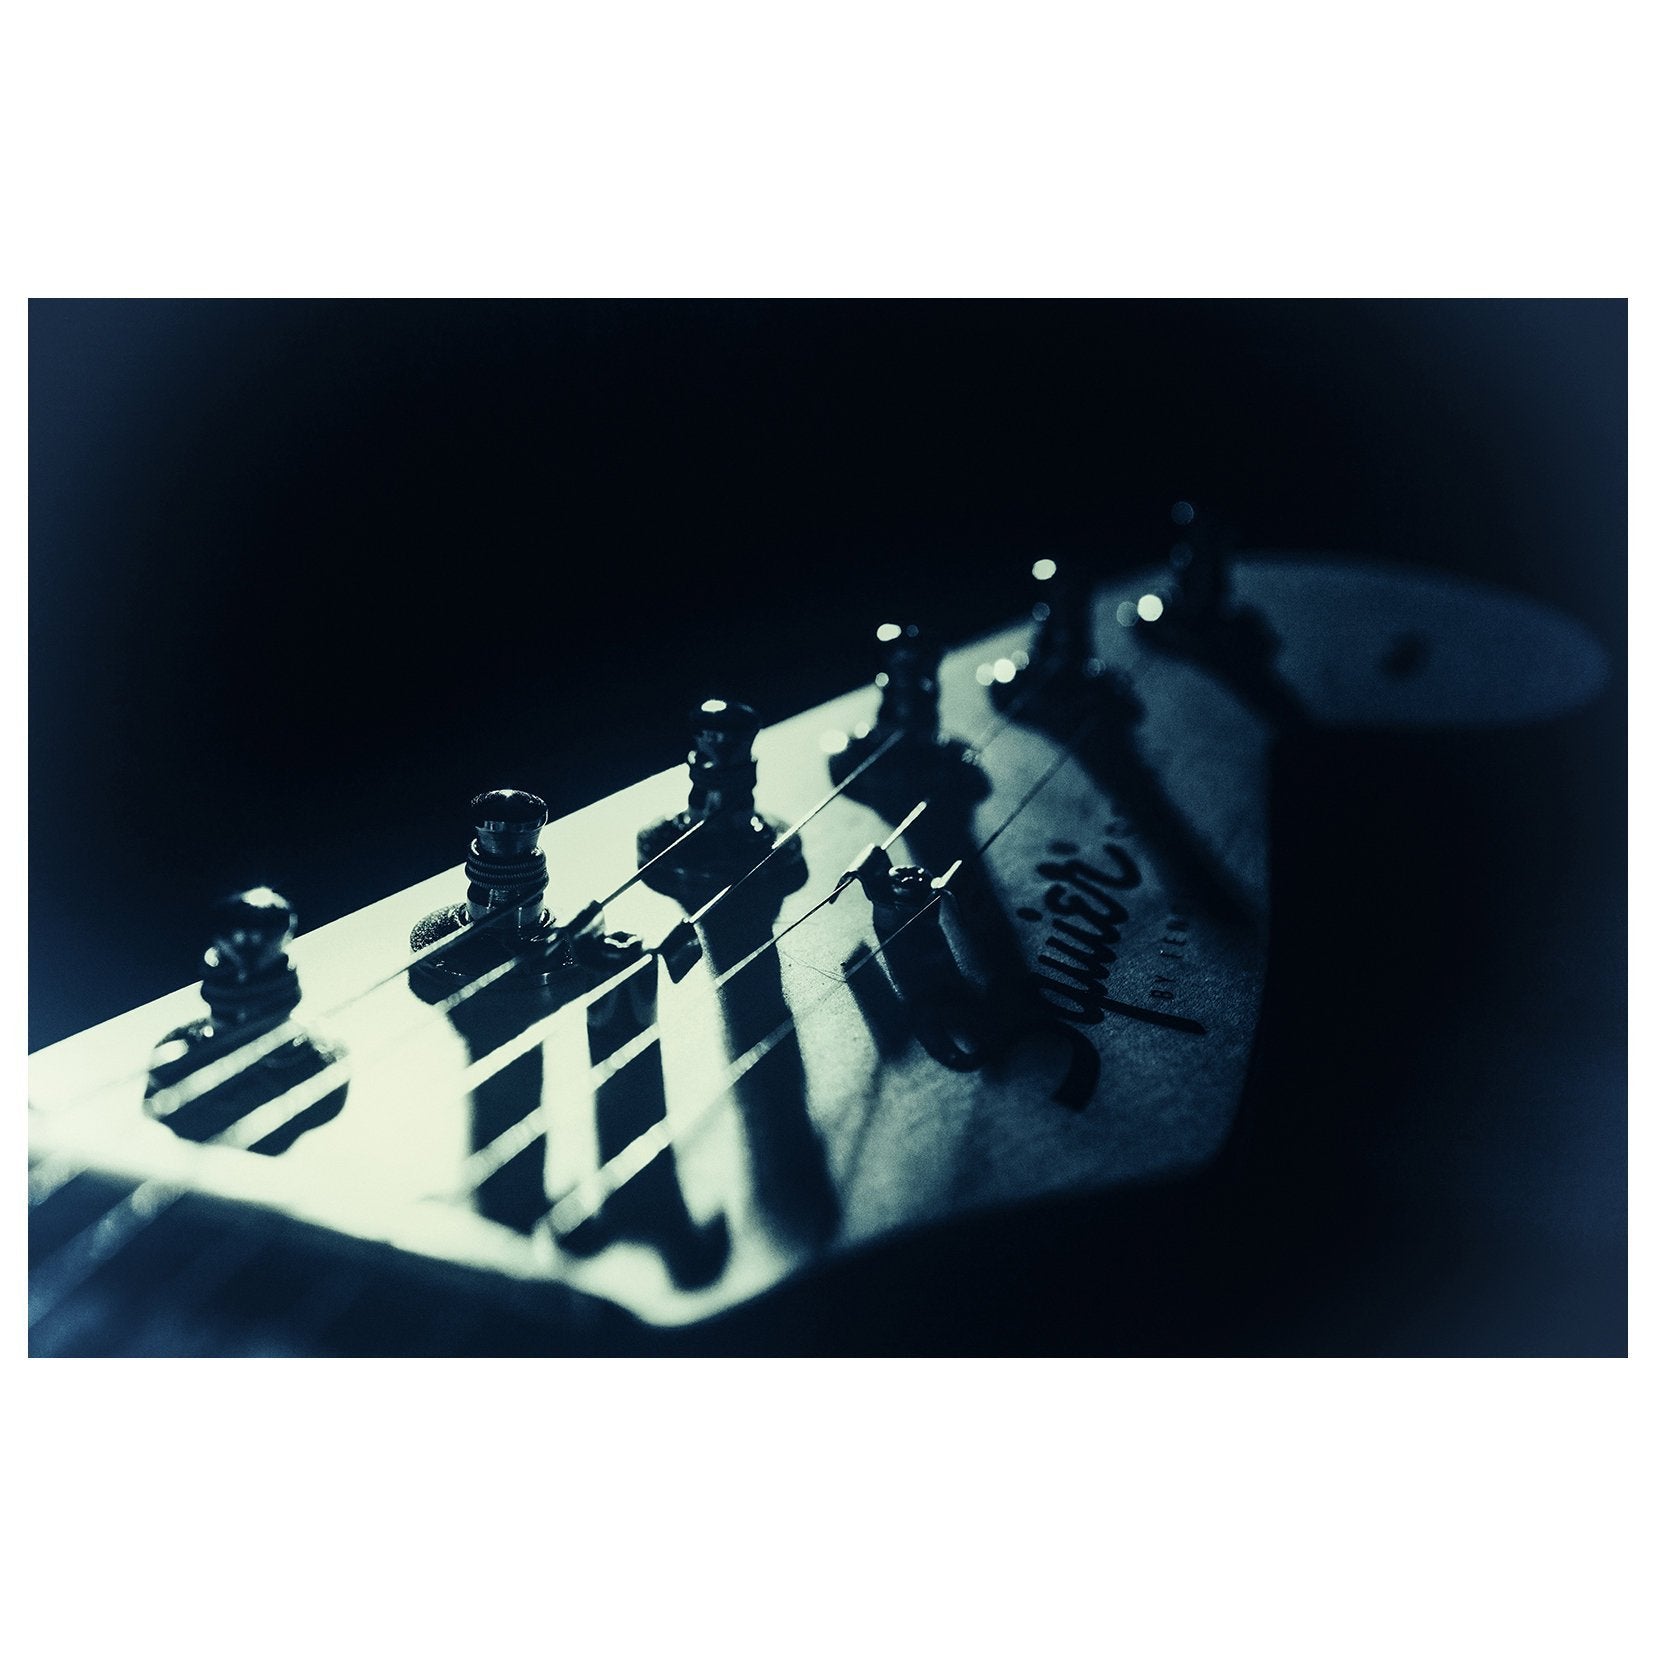 Squire Electric Guitar Head Colorized Black and White Abstract Photo Fine Art Canvas & Unframed Wall Art Prints  - PIPAFINEART